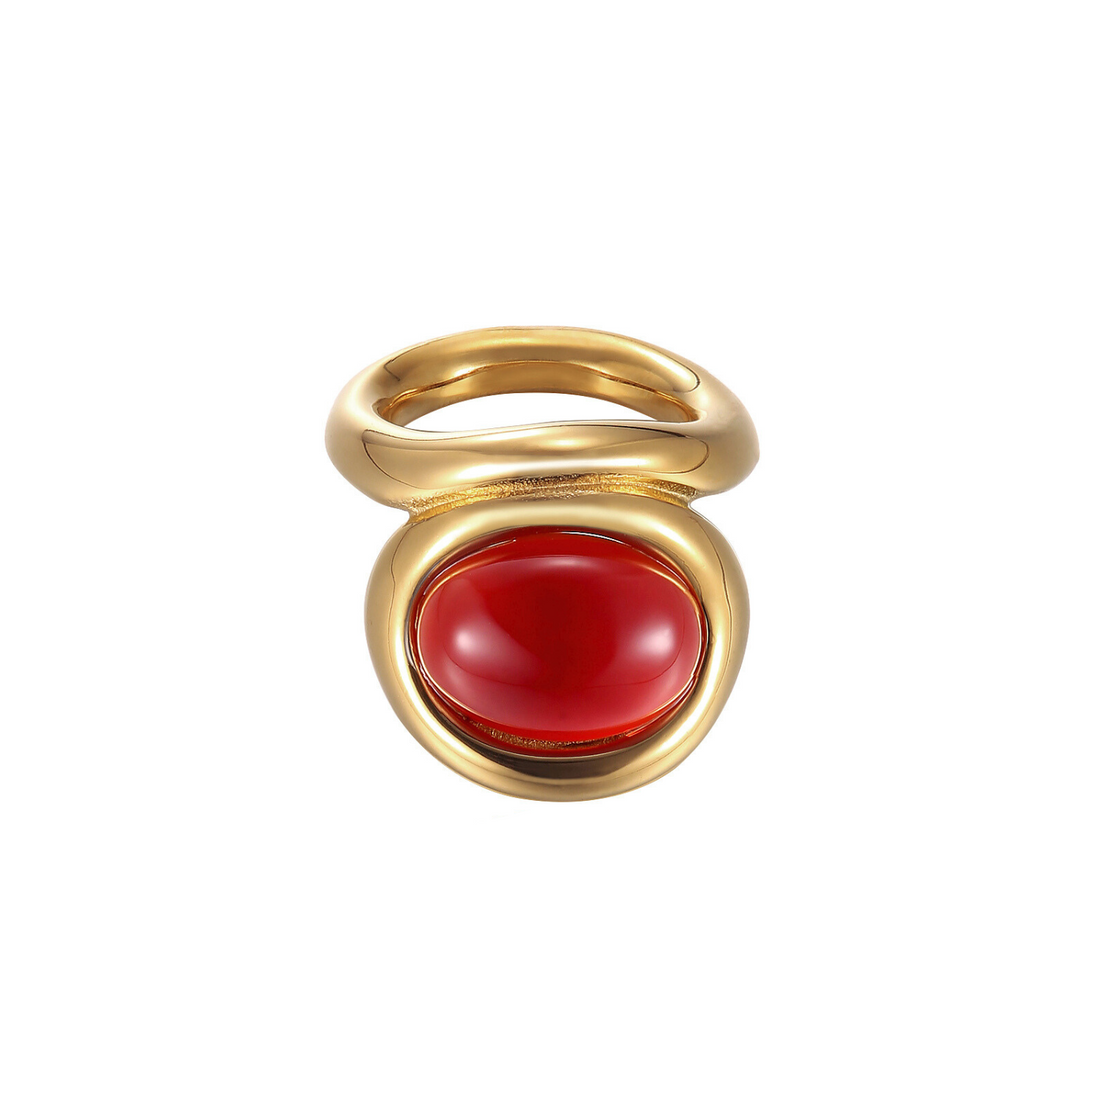 STATEMENT COCKTAIL RING. RED